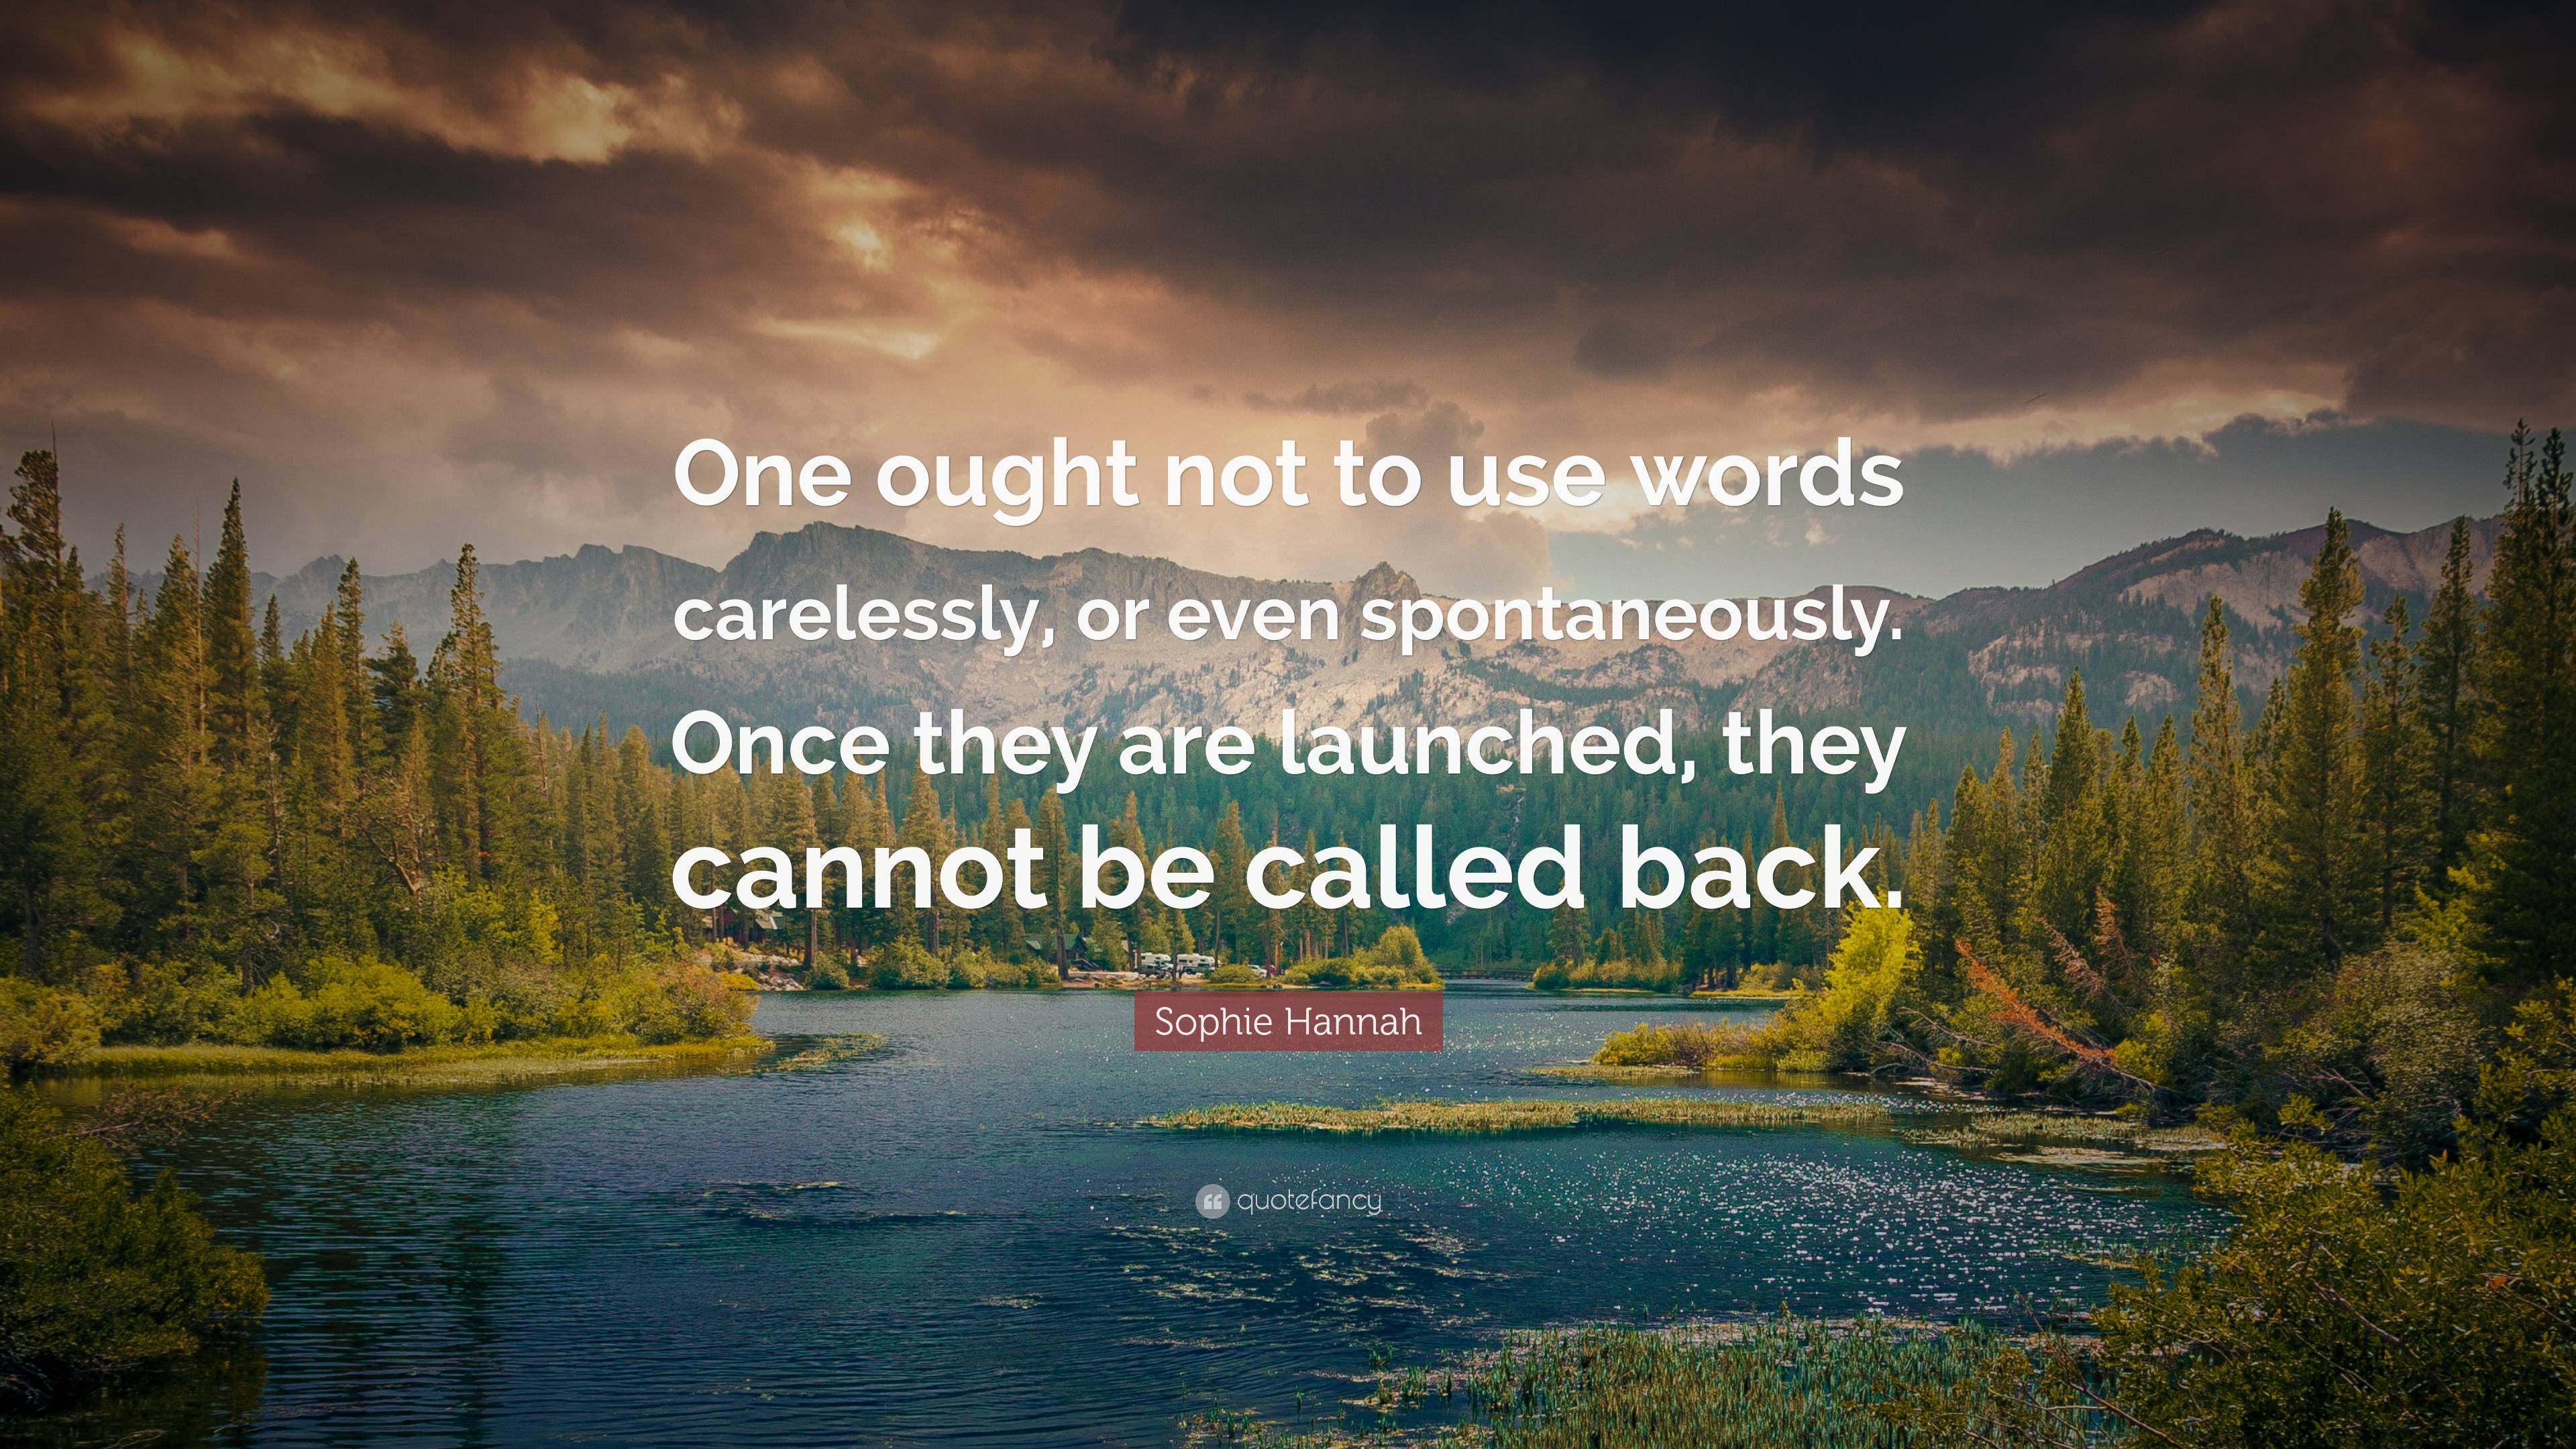 Sophie Hannah Quote: “One ought not to use words carelessly, or even  spontaneously. Once they are